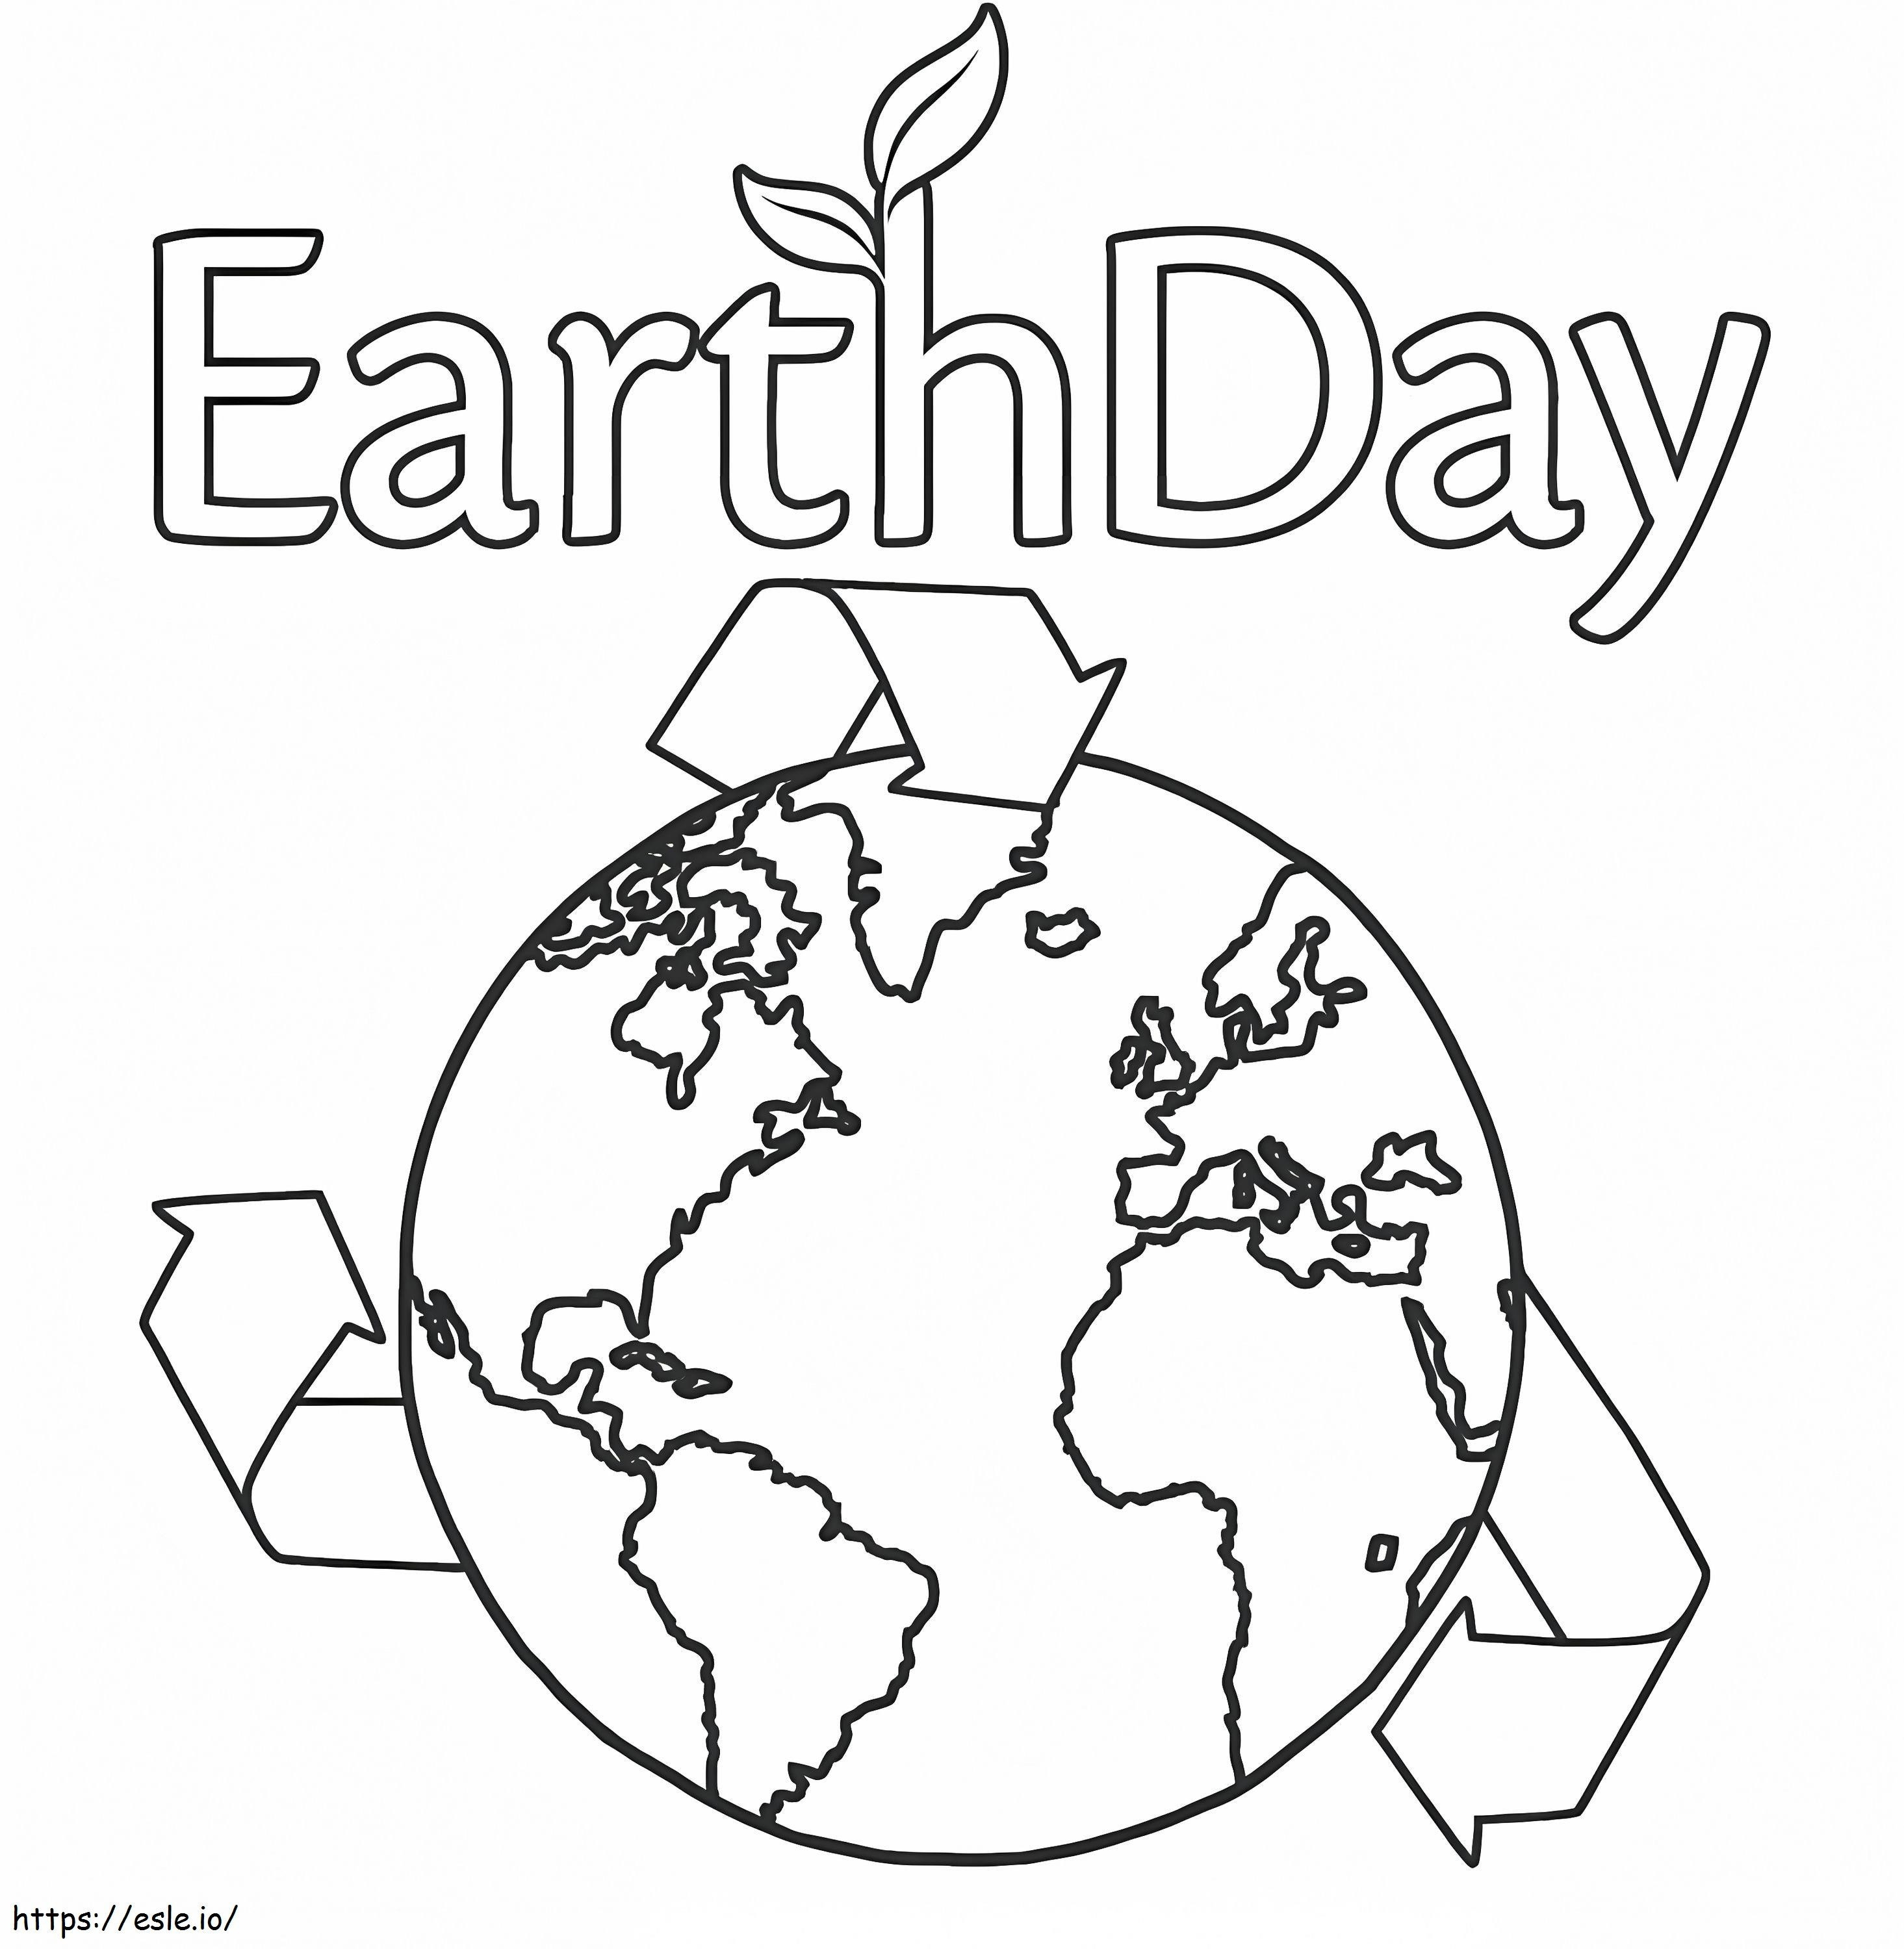 Earth Day 5 coloring page